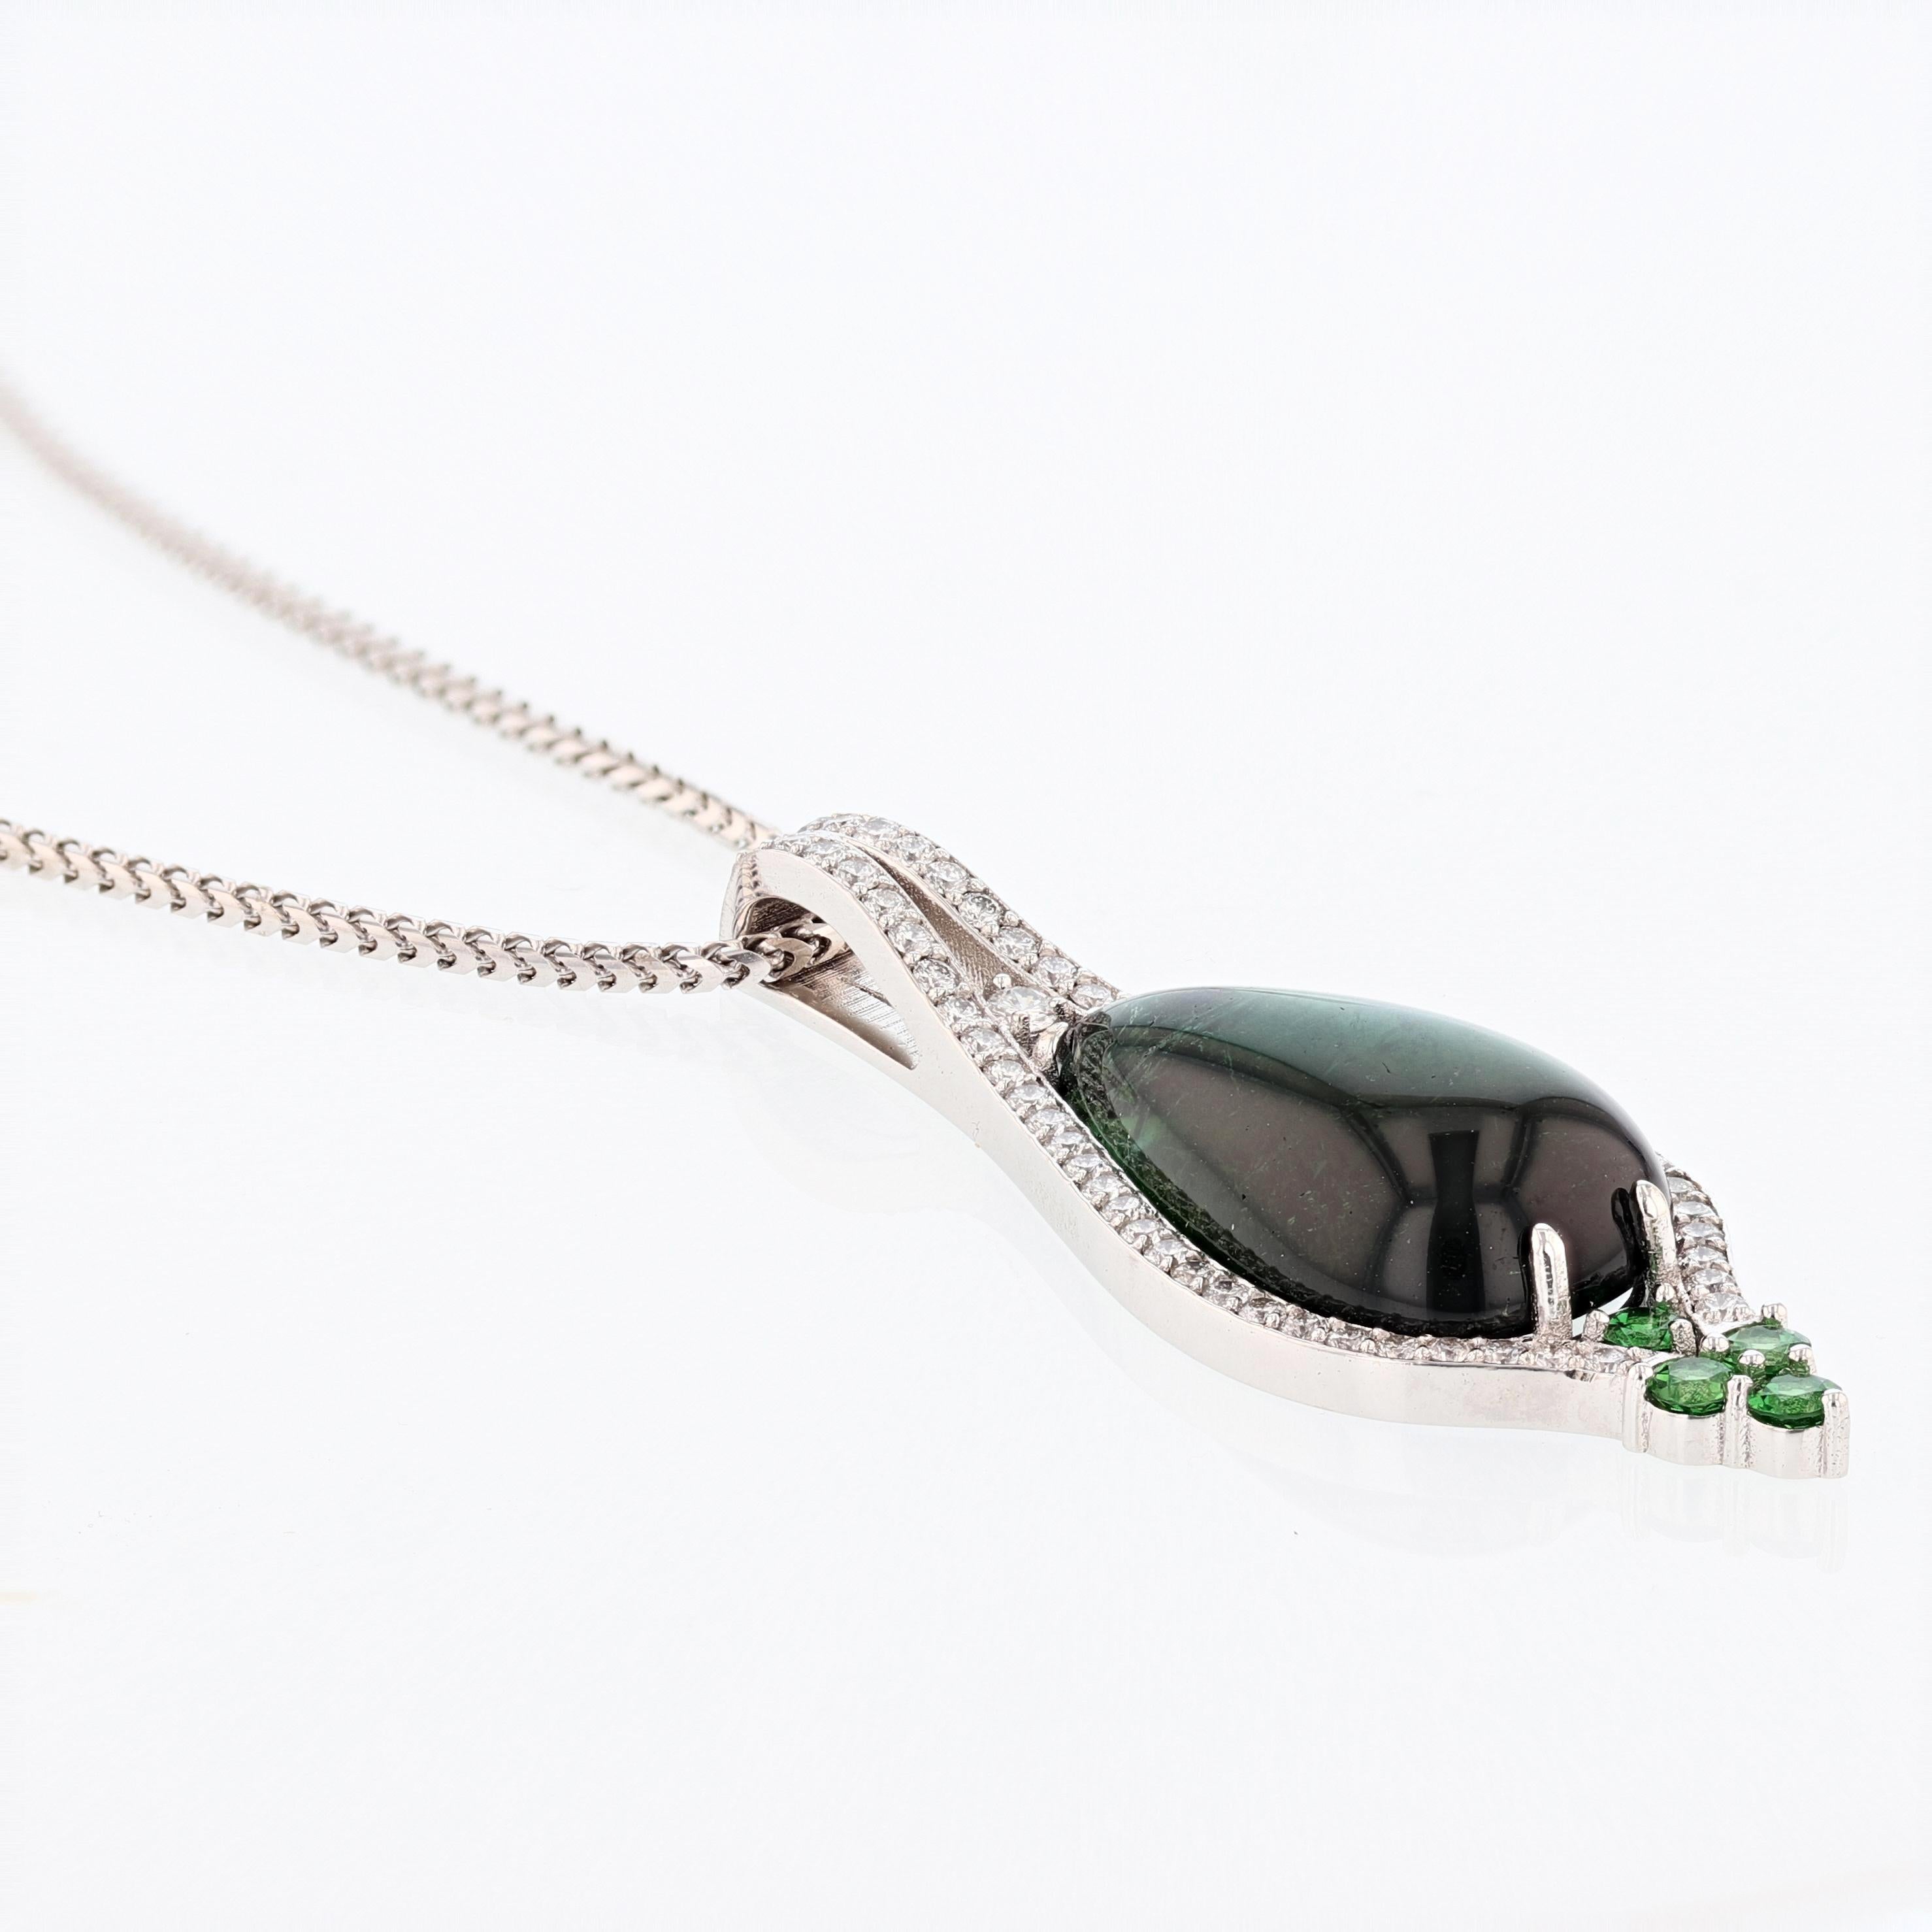 The pendant is set in 18k white gold and features a prong set 20.55ct Pear shape Cabochon Green Tourmaline. The Green Tourmaline is surrounded by 57 round cut brilliant diamonds weighing 1.00ct with a color grade (H) clarity grade (SI1-SI2) and 4